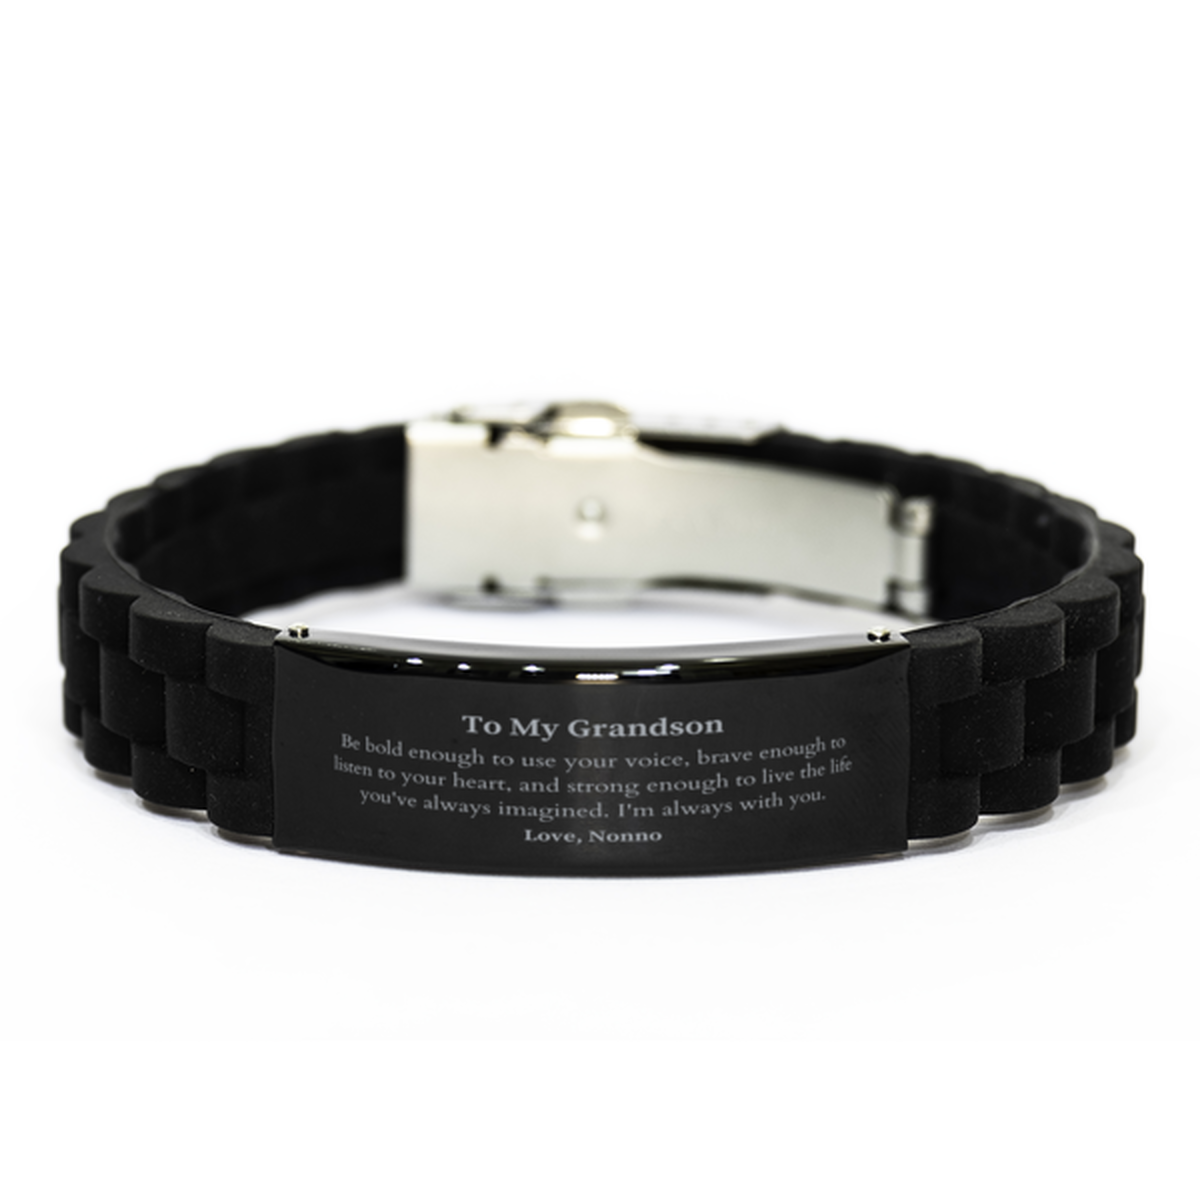 Keepsake Grandson Black Glidelock Clasp Bracelet Gift Idea Graduation Christmas Birthday Grandson from Nonno, Grandson Be bold enough to use your voice, brave enough to listen to your heart. Love, Nonno